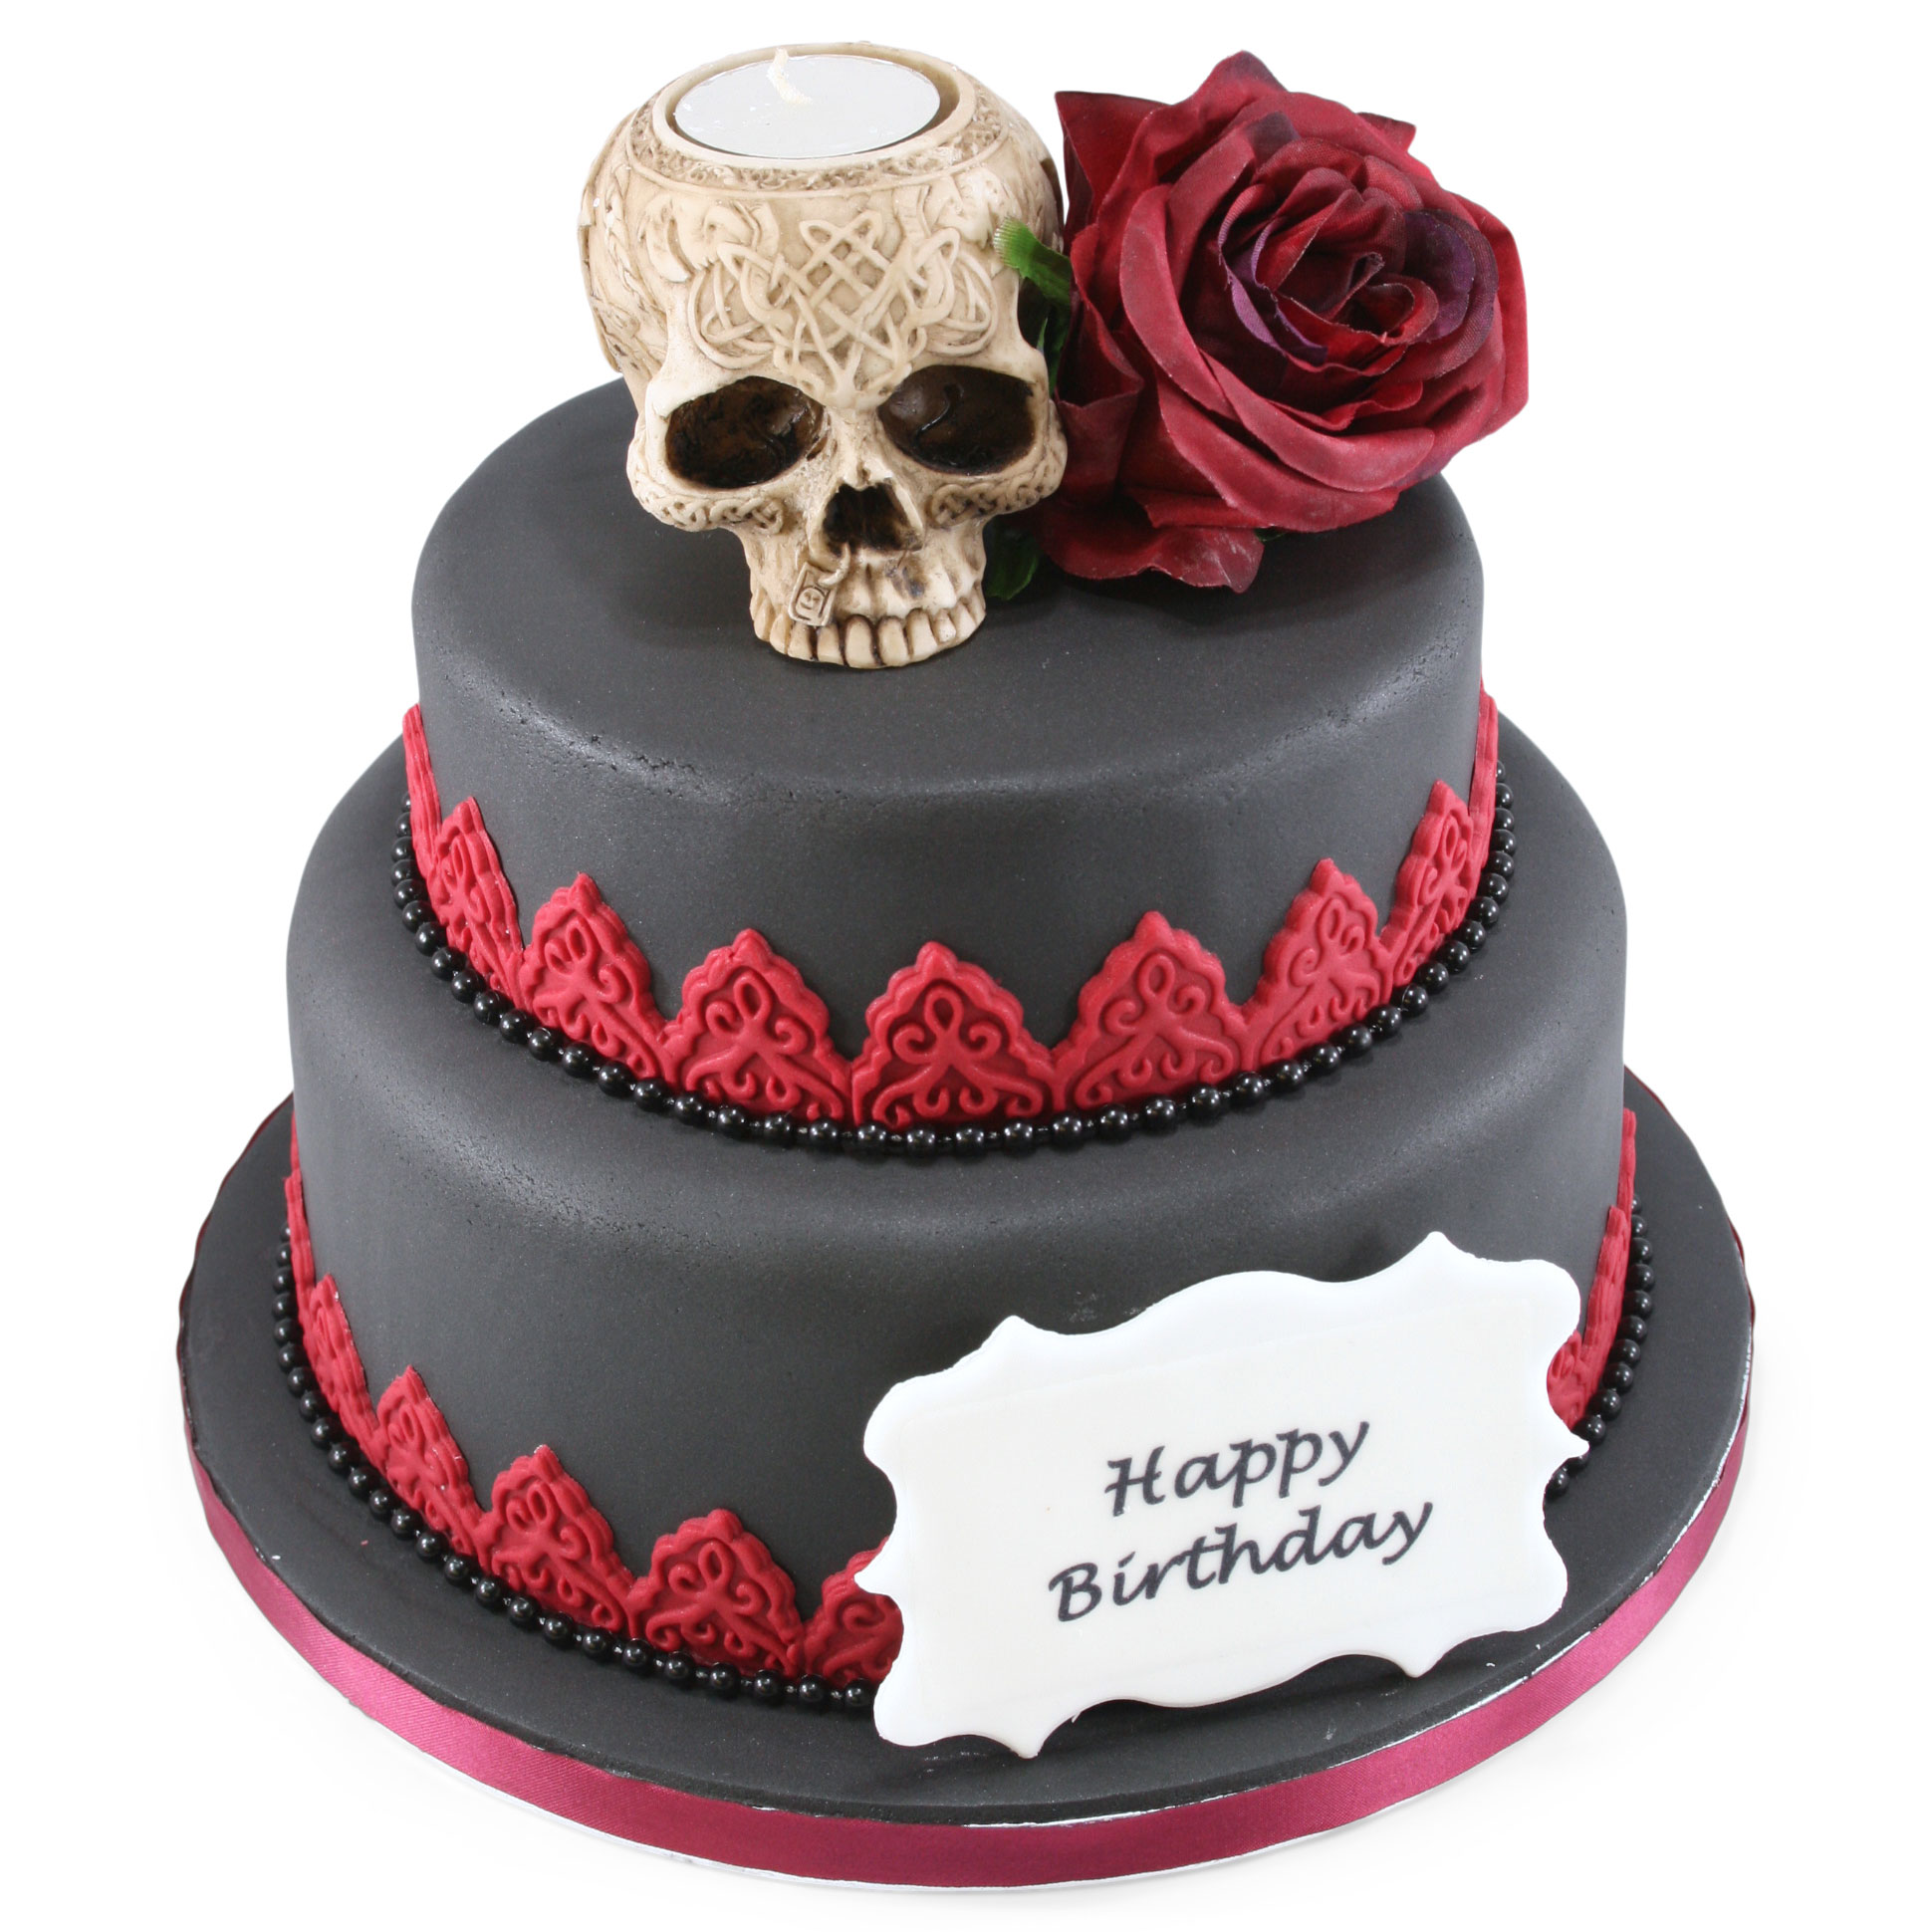 Chocolate Skull Cake Toppers / Edible Cake Decorations - Robins & Sons  Chocolate